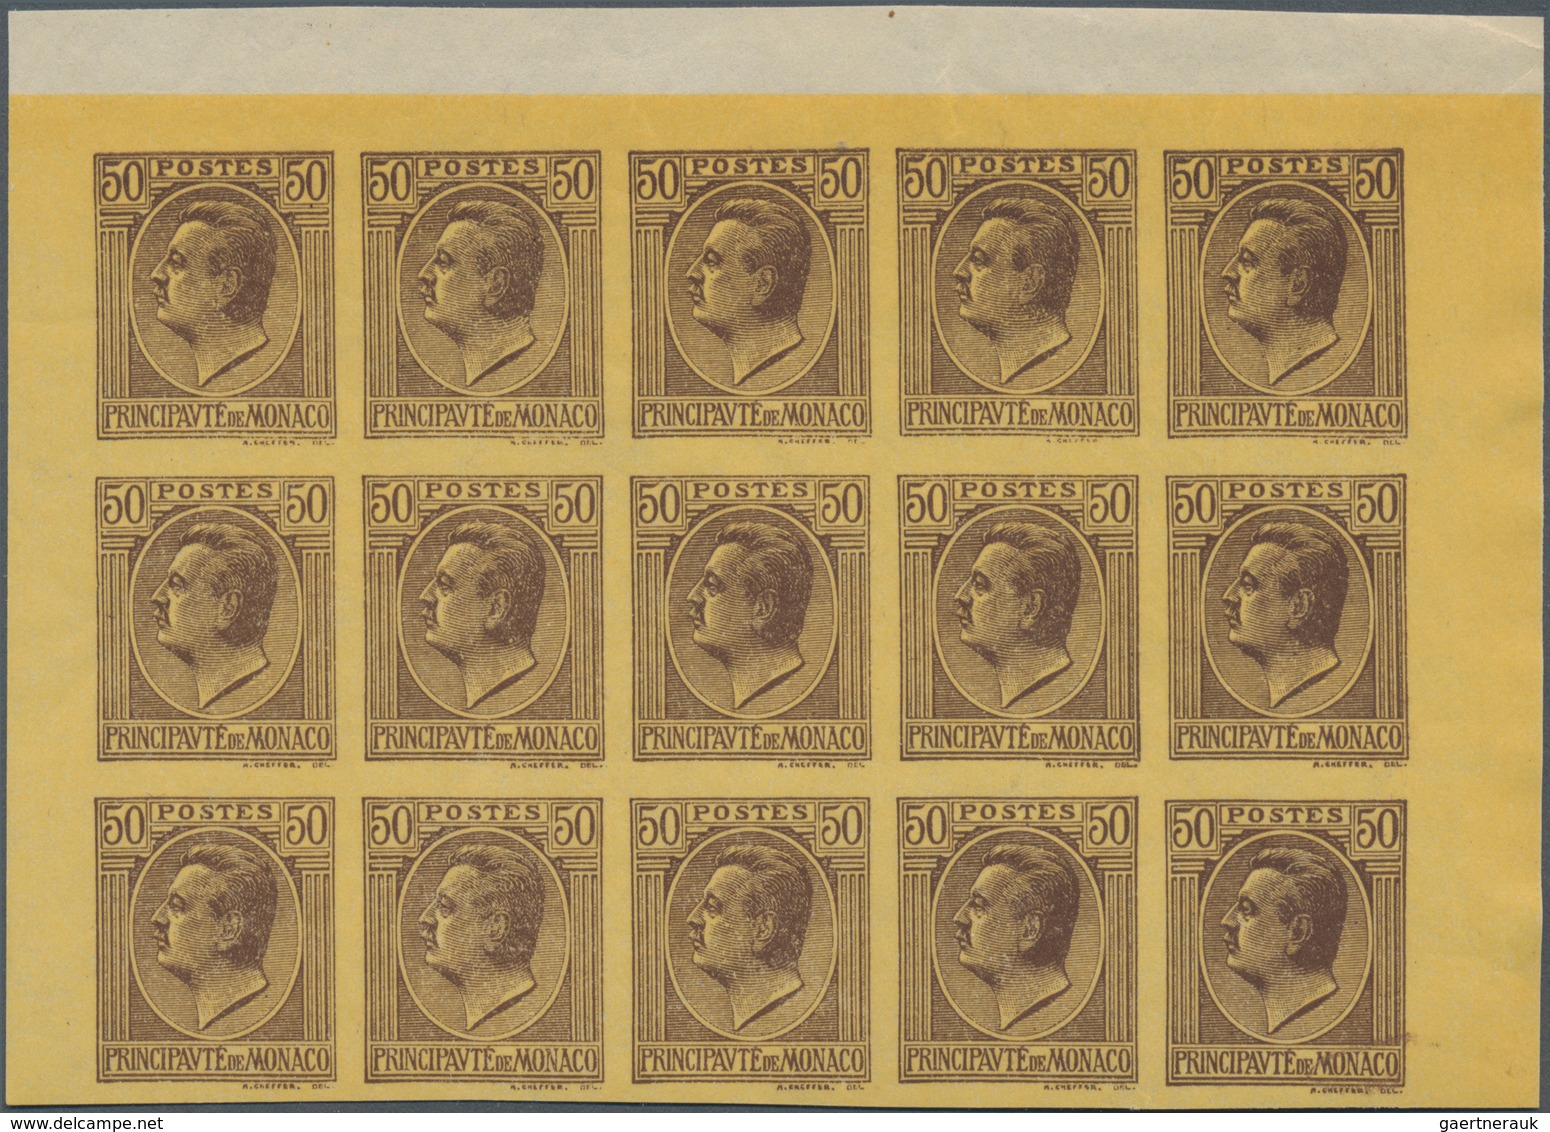 Monaco: 1885/1943, comprehensive mint and used accumulation on stockcards, well sorted throughout in